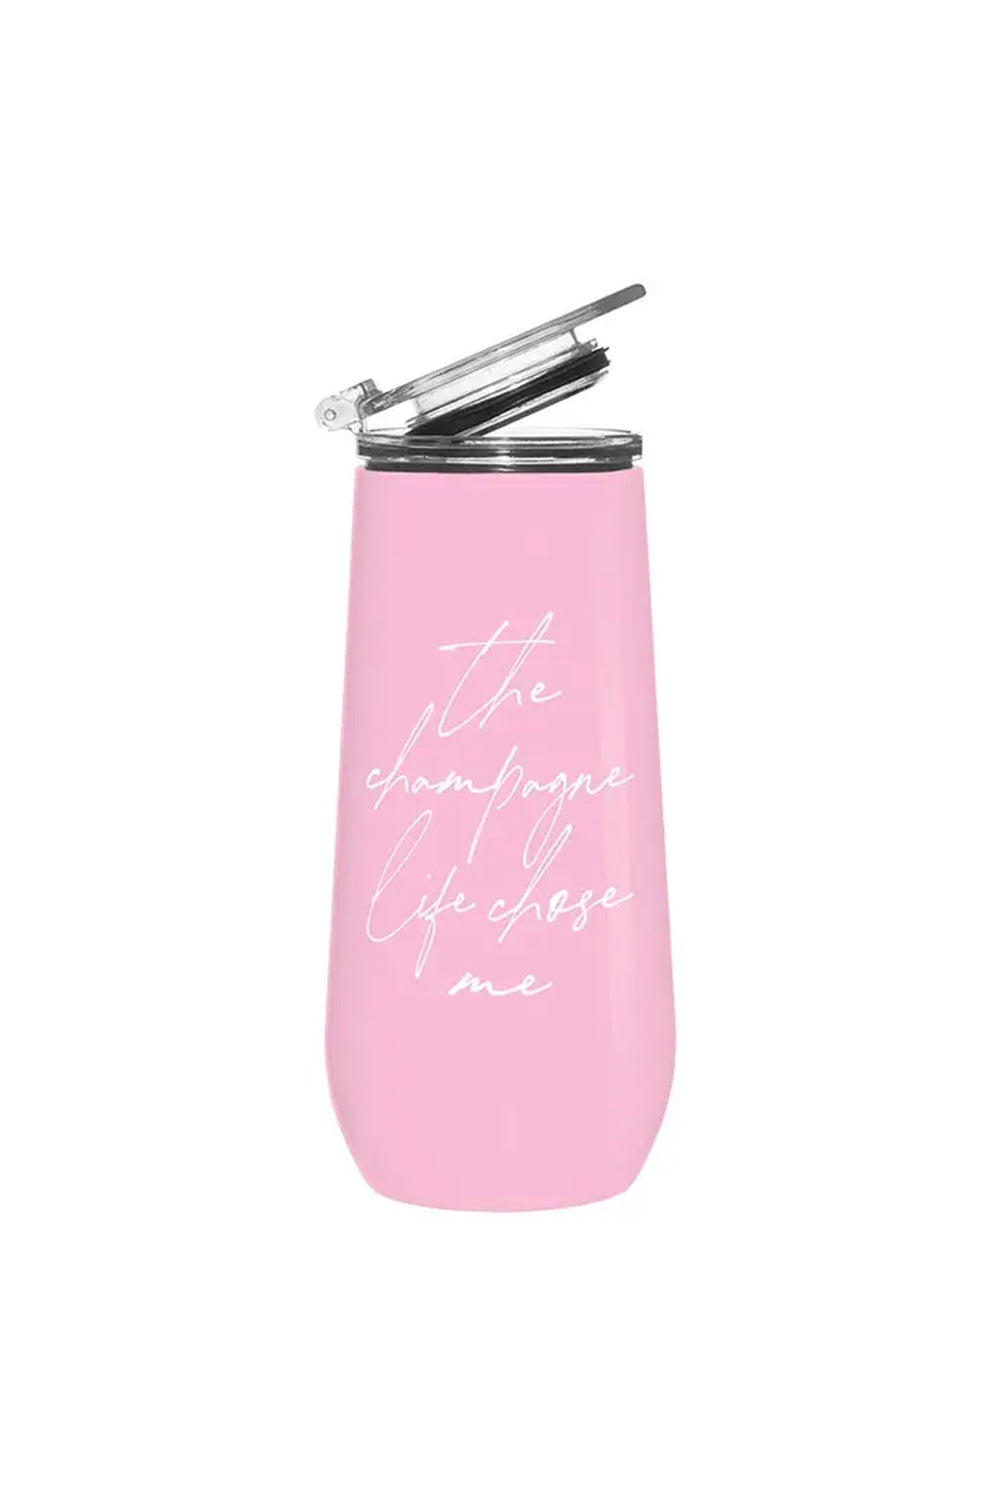 Day Dinker Insulated Champagne Tumbler